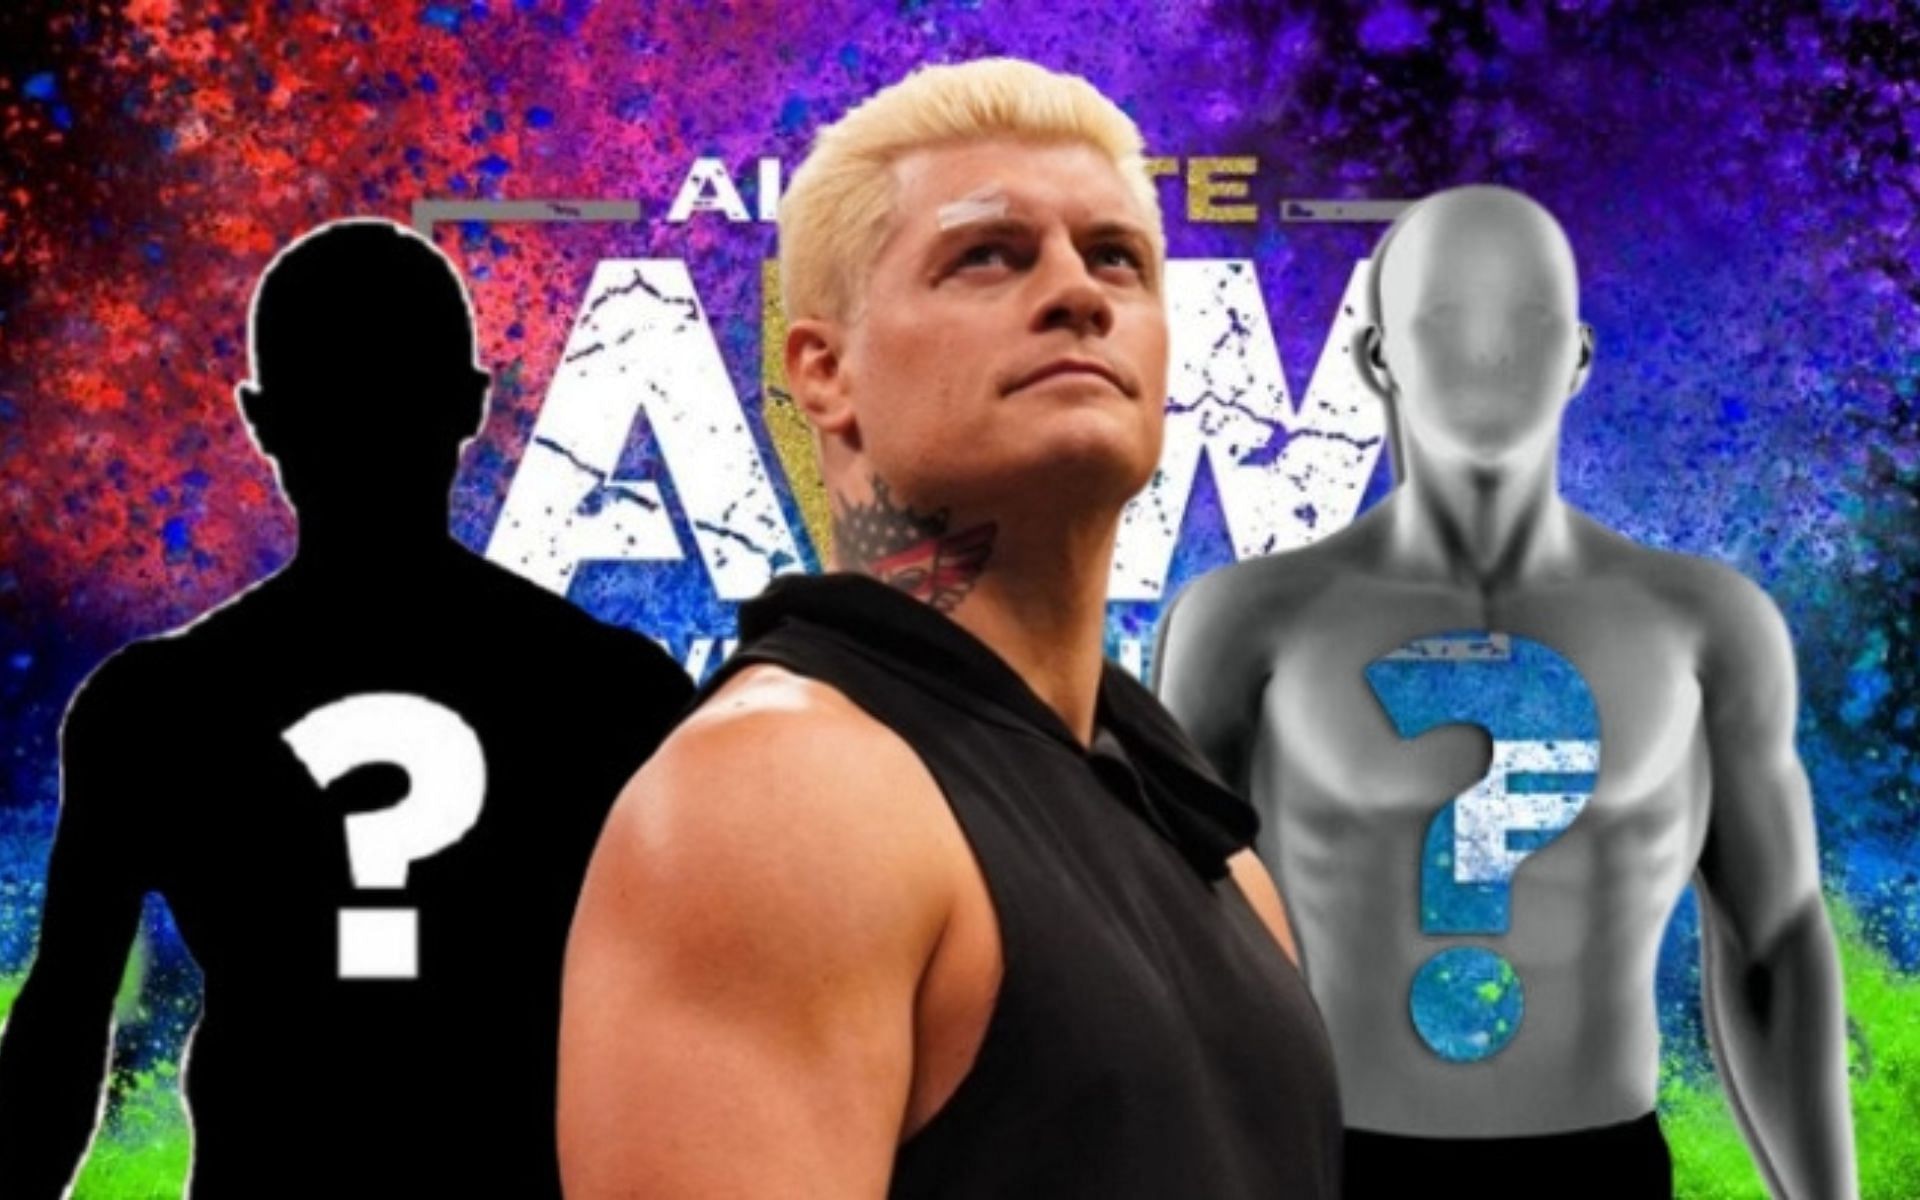 An ex-AEW star has made some interesting revelations about Cody Rhodes